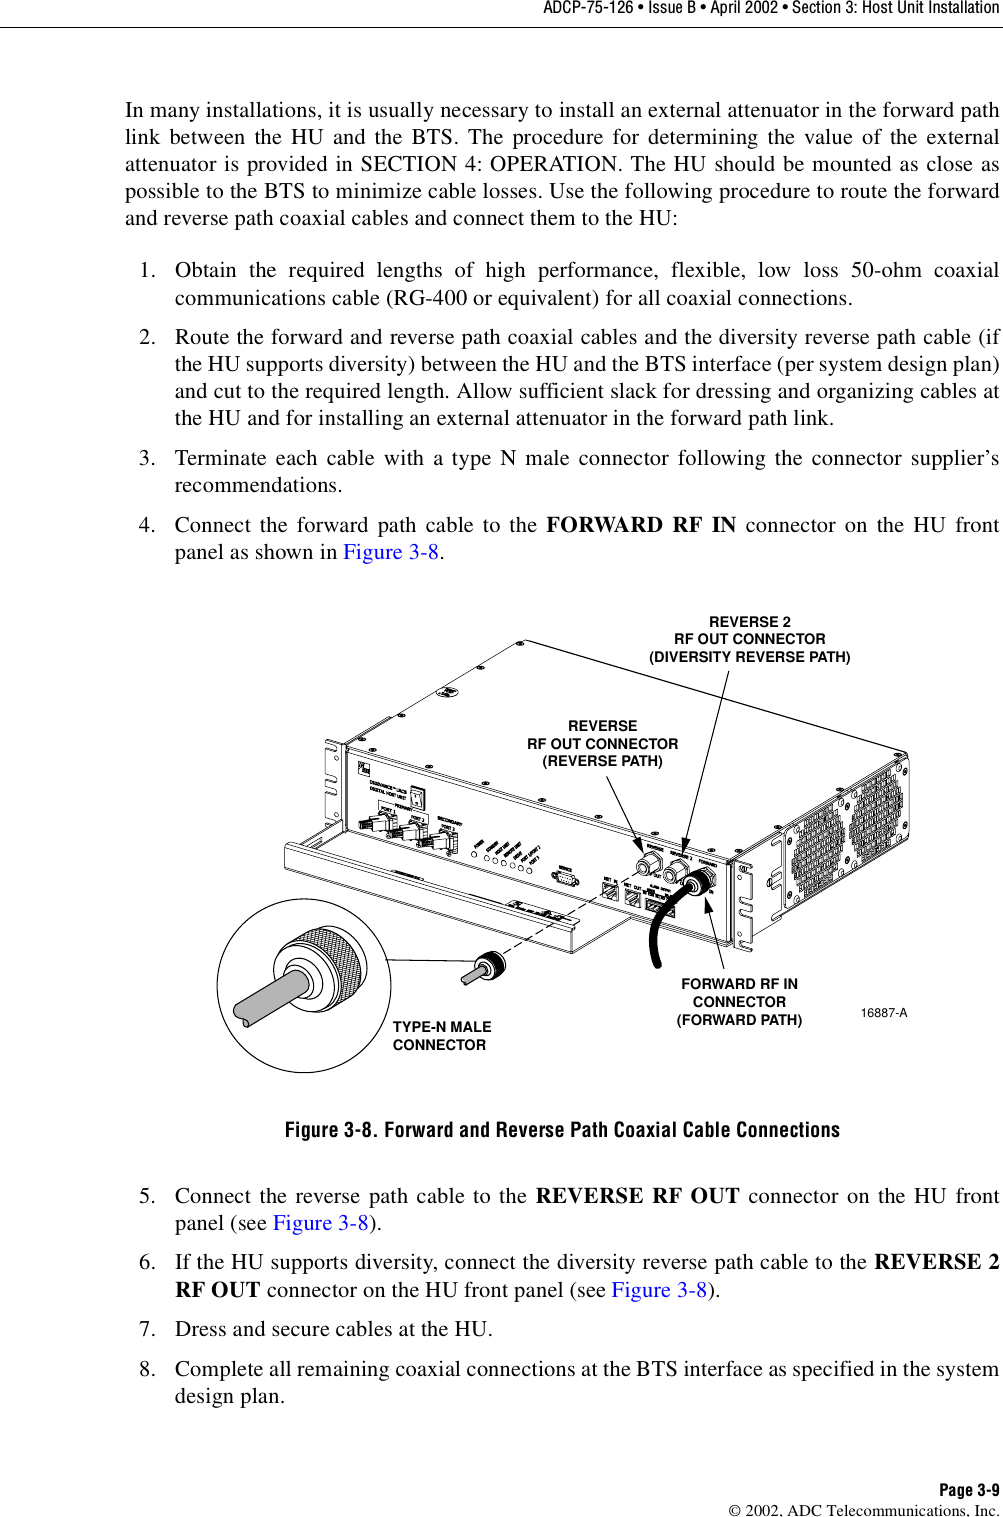 ADCP-75-126 • Issue B • April 2002 • Section 3: Host Unit InstallationPage 3-9©2002, ADC Telecommunications, Inc.In many installations, it is usually necessary to install an external attenuator in the forward pathlink between the HU and the BTS. The procedure for determining the value of the externalattenuator is provided in SECTION 4: OPERATION. The HU should be mounted as close aspossible to the BTS to minimize cable losses. Use the following procedure to route the forwardand reverse path coaxial cables and connect them to the HU:1. Obtain the required lengths of high performance, flexible, low loss 50-ohm coaxialcommunications cable (RG-400 or equivalent) for all coaxial connections.2. Route the forward and reverse path coaxial cables and the diversity reverse path cable (ifthe HU supports diversity) between the HU and the BTS interface (per system design plan)and cut to the required length. Allow sufficient slack for dressing and organizing cables atthe HU and for installing an external attenuator in the forward path link.3. Terminate each cable with atype Nmale connector following the connector supplier’srecommendations.4. Connect the forward path cable to the FORWARD RF IN connector on the HU frontpanel as shown in Figure 3-8.Figure 3-8. Forward and Reverse Path Coaxial Cable Connections5. Connect the reverse path cable to the REVERSE RF OUT connector on the HU frontpanel (see Figure 3-8).6. If the HU supports diversity, connect the diversity reverse path cable to the REVERSE 2RF OUT connector on the HU front panel (see Figure 3-8).7. Dress and secure cables at the HU.8. Complete all remaining coaxial connections at the BTS interface as specified in the systemdesign plan.16887-ATYPE-N MALECONNECTORFORWARD RF INCONNECTOR(FORWARD PATH)REVERSERF OUT CONNECTOR(REVERSE PATH)REVERSE 2RF OUT CONNECTOR(DIVERSITY REVERSE PATH)